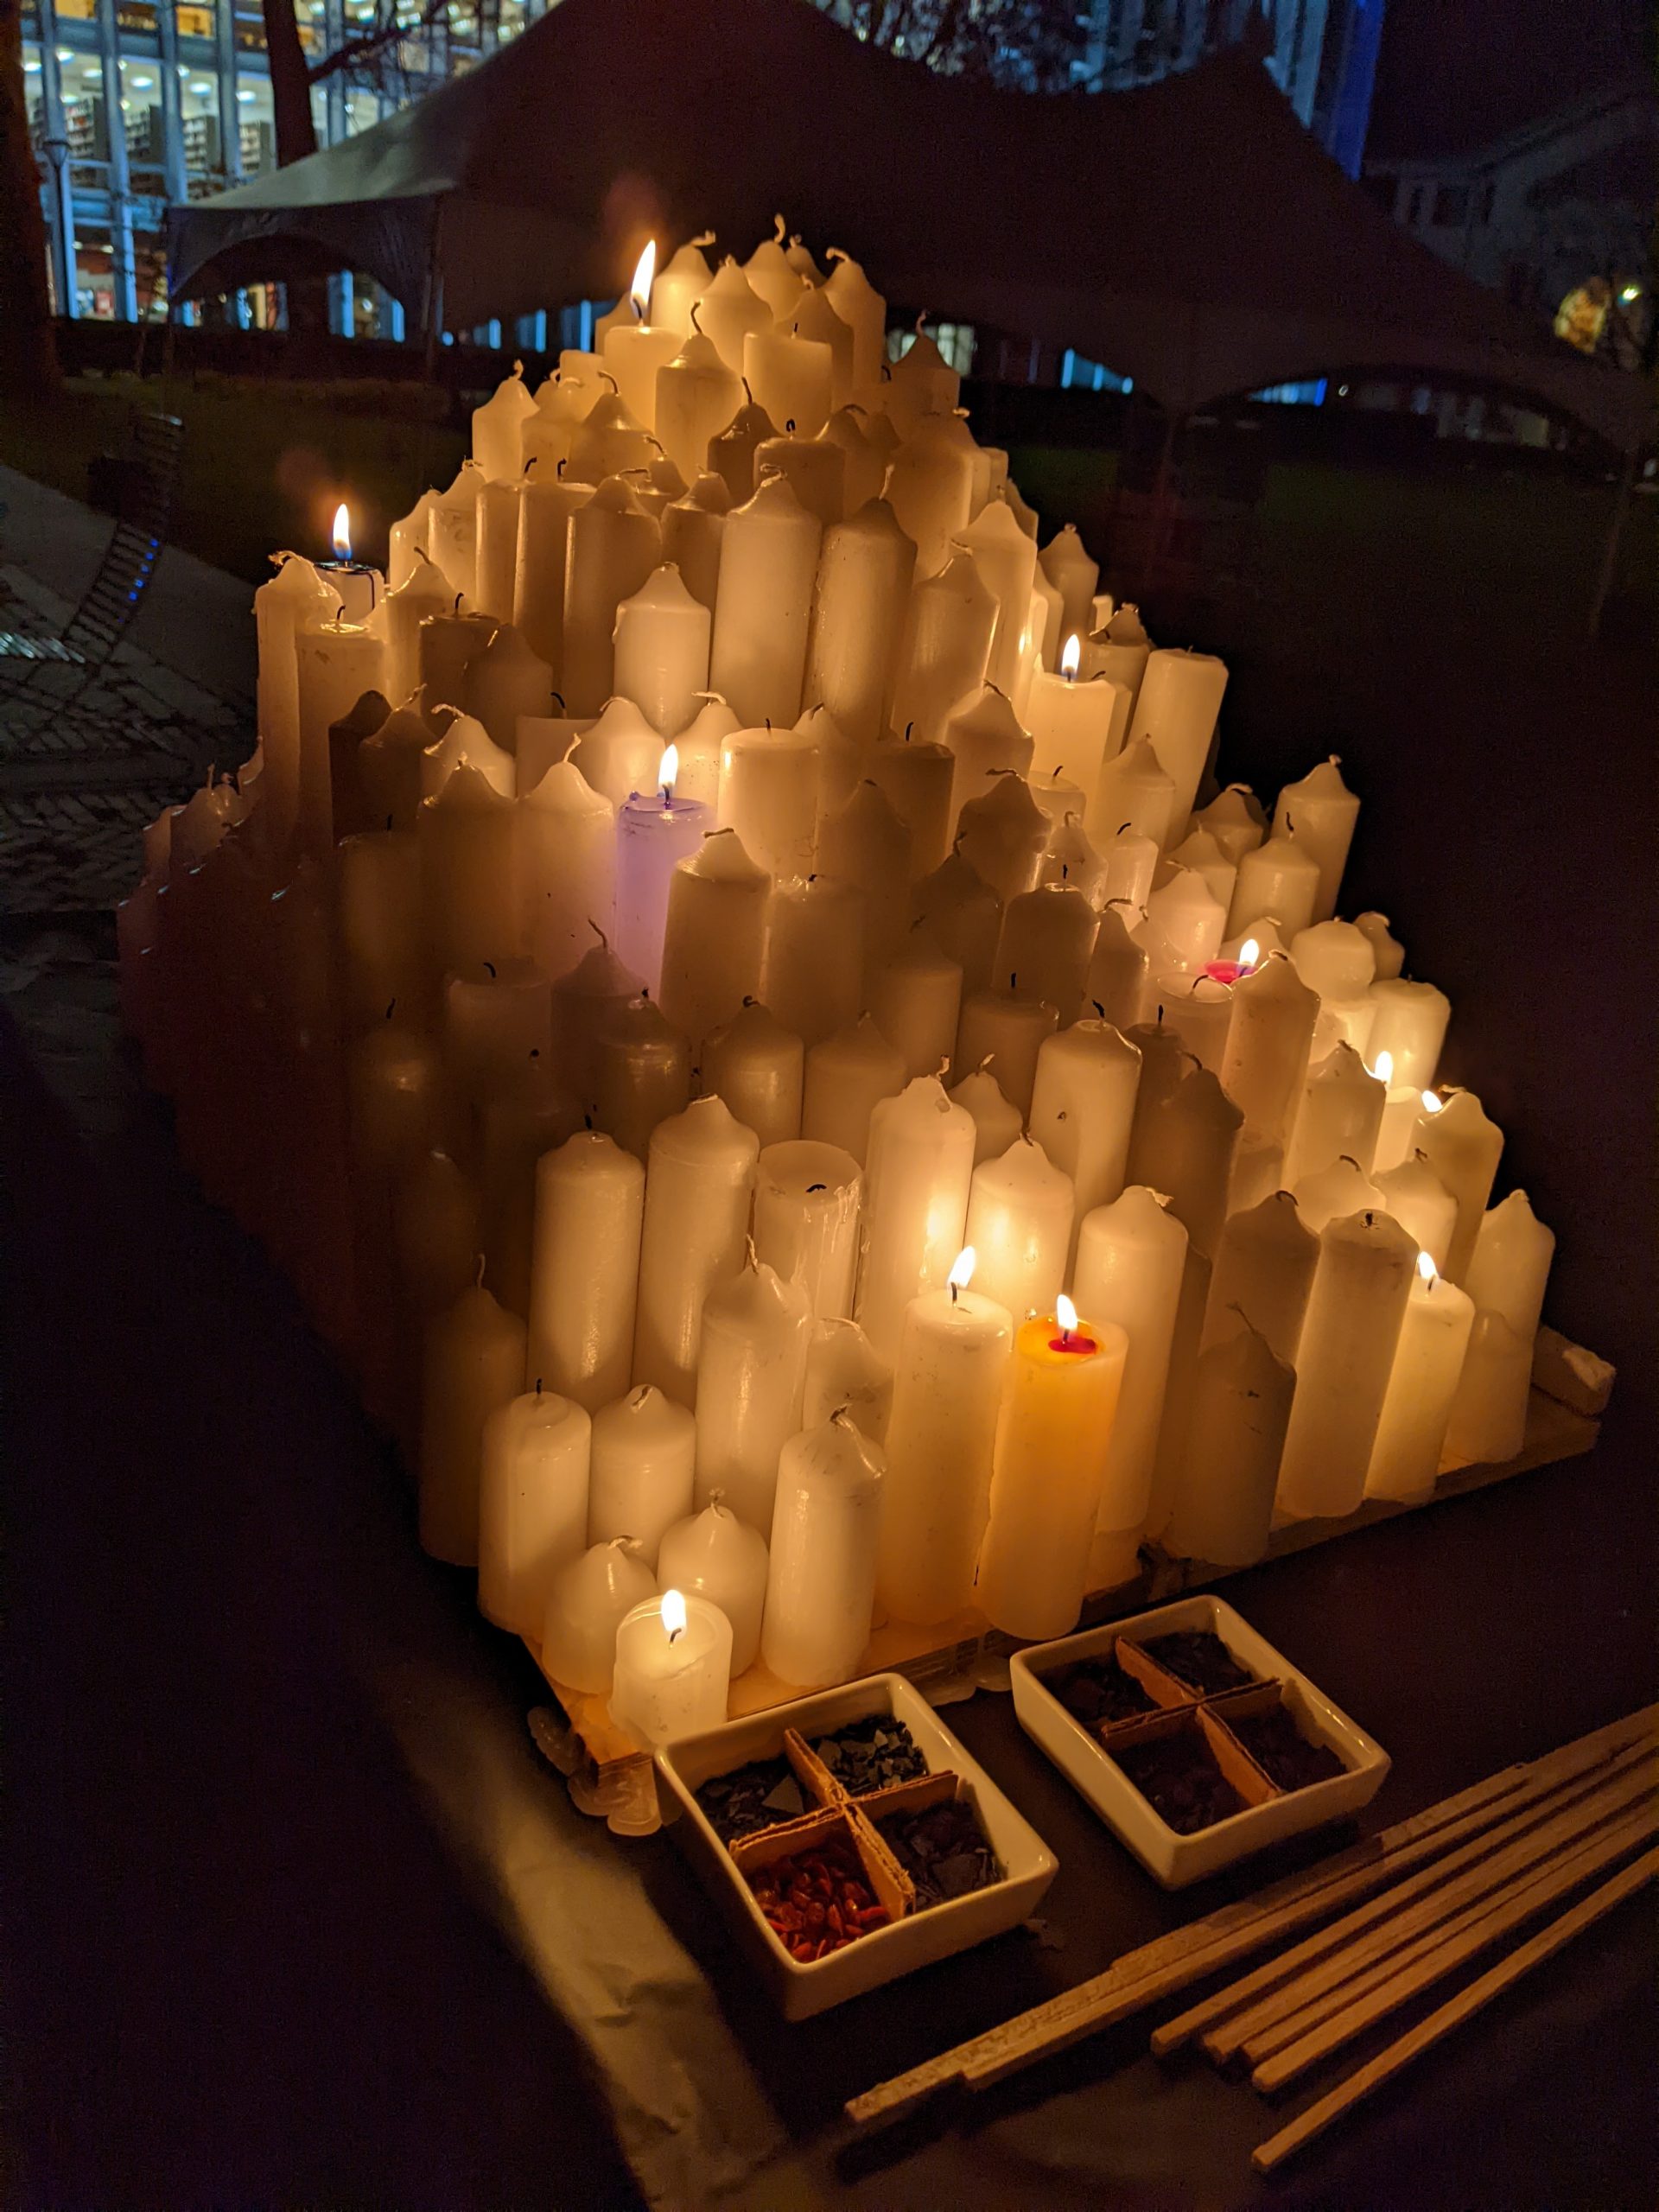 Dramatic shot of candle mountain with dye chips with the long matches